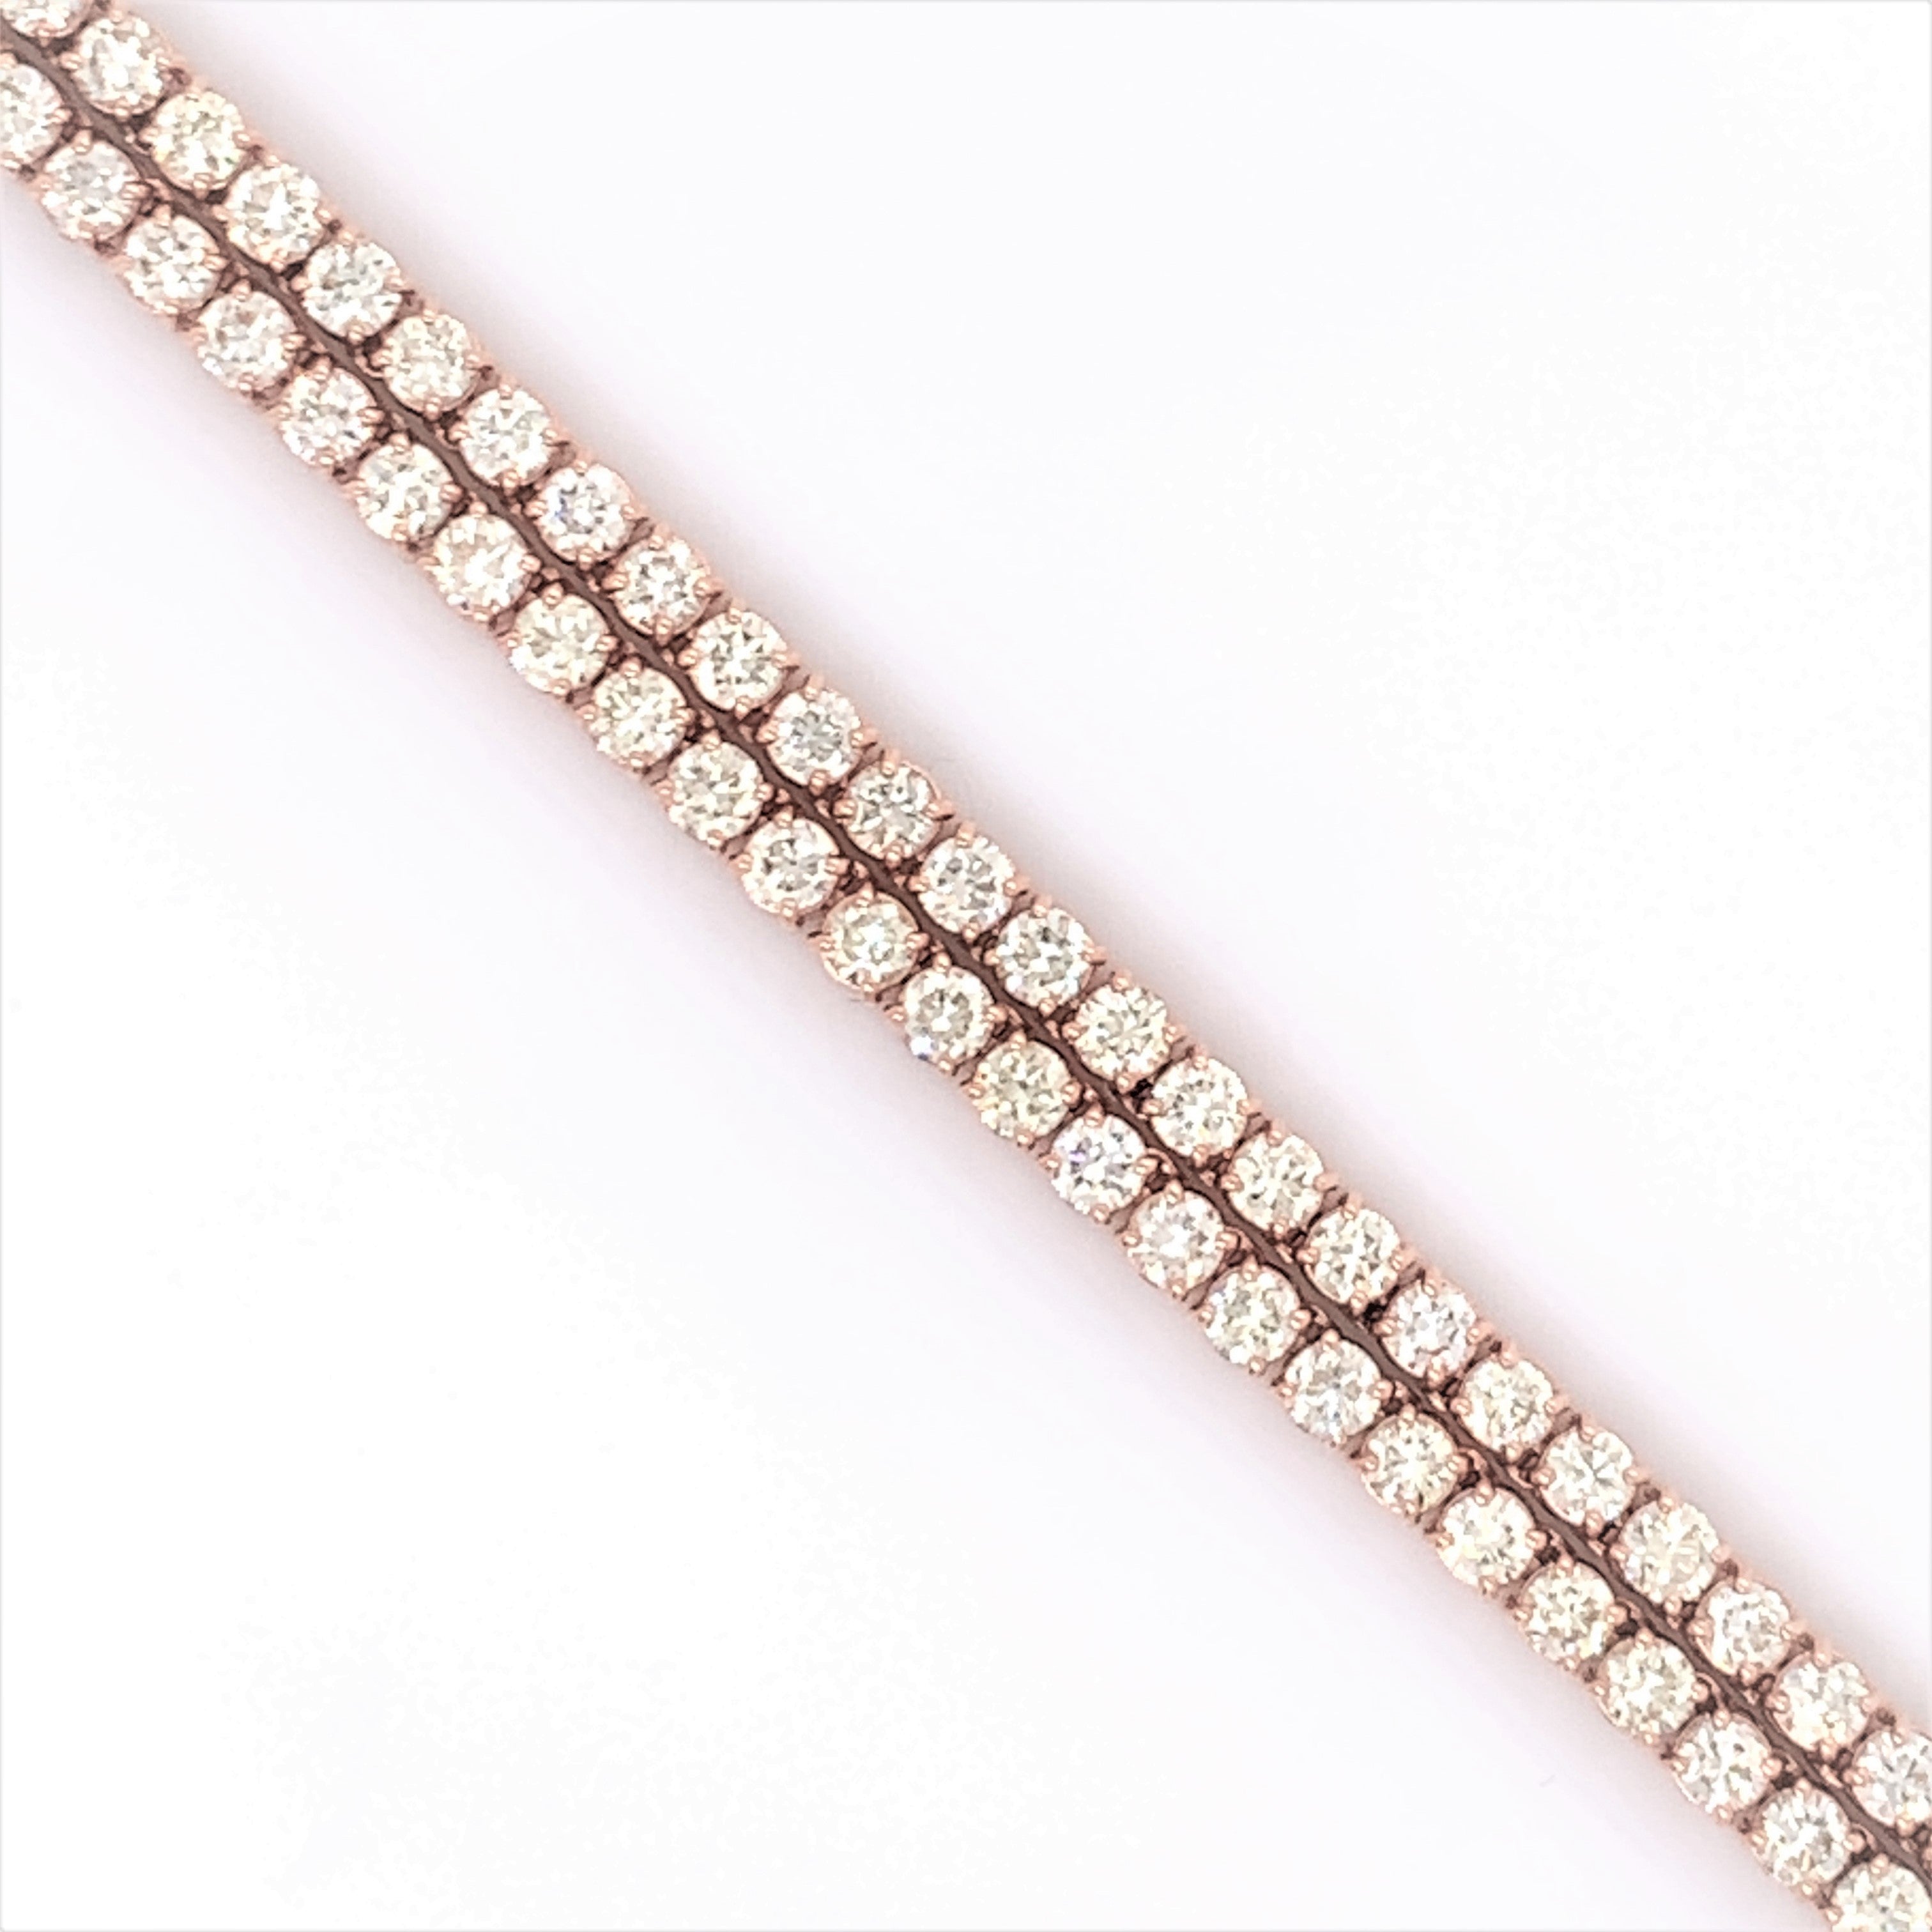 4PT- 13.63 CT. VVS Tennis Necklace in 14K Rose Gold (4 Prong) - White Carat - USA & Canada